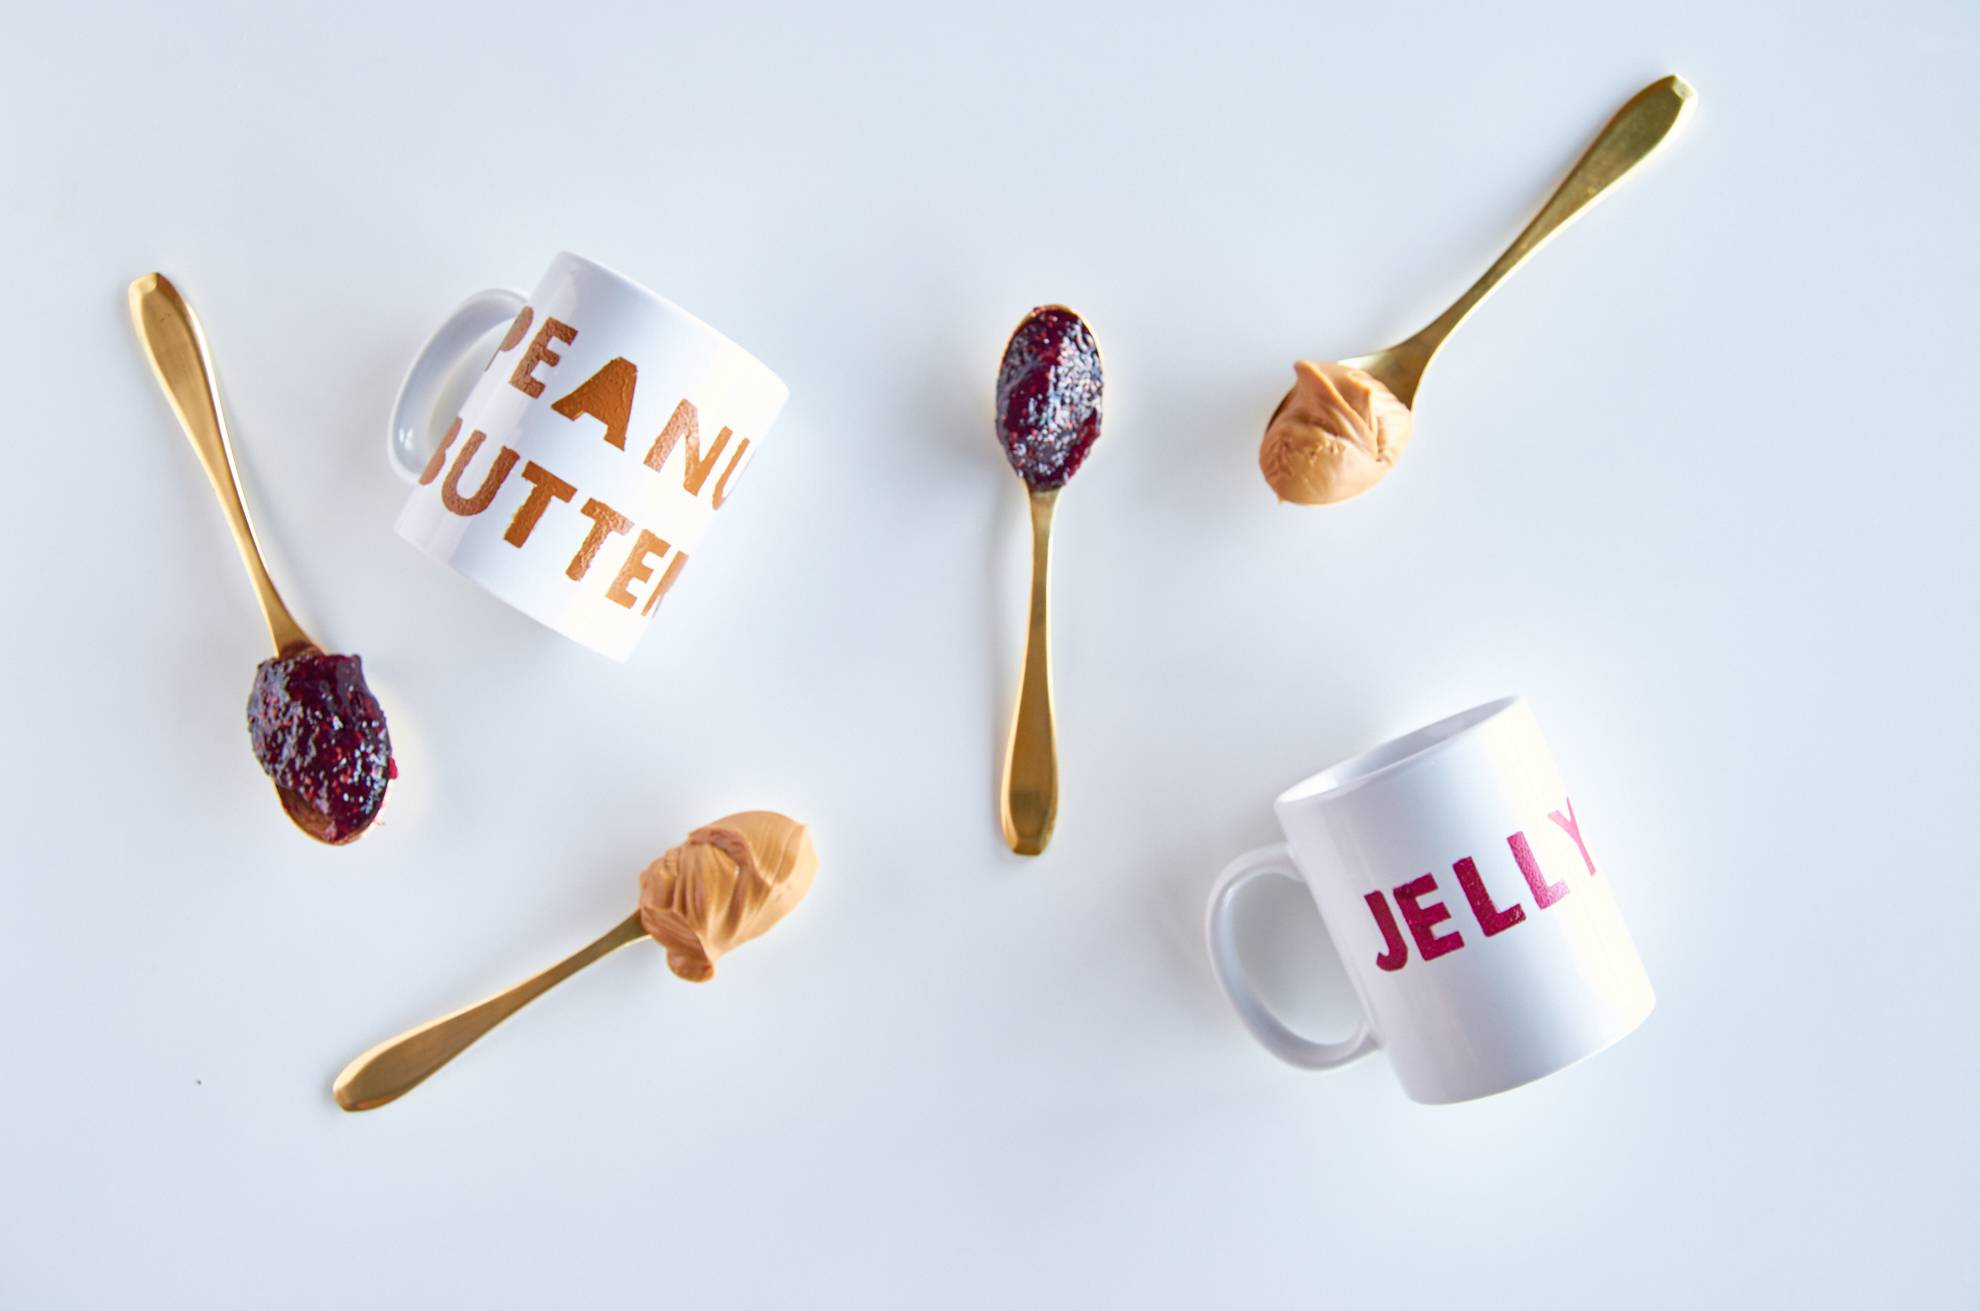 Two spoons with jelly and two spoons with peanut butter scattered about a mug that says peanut butter and a mug that says jelly.